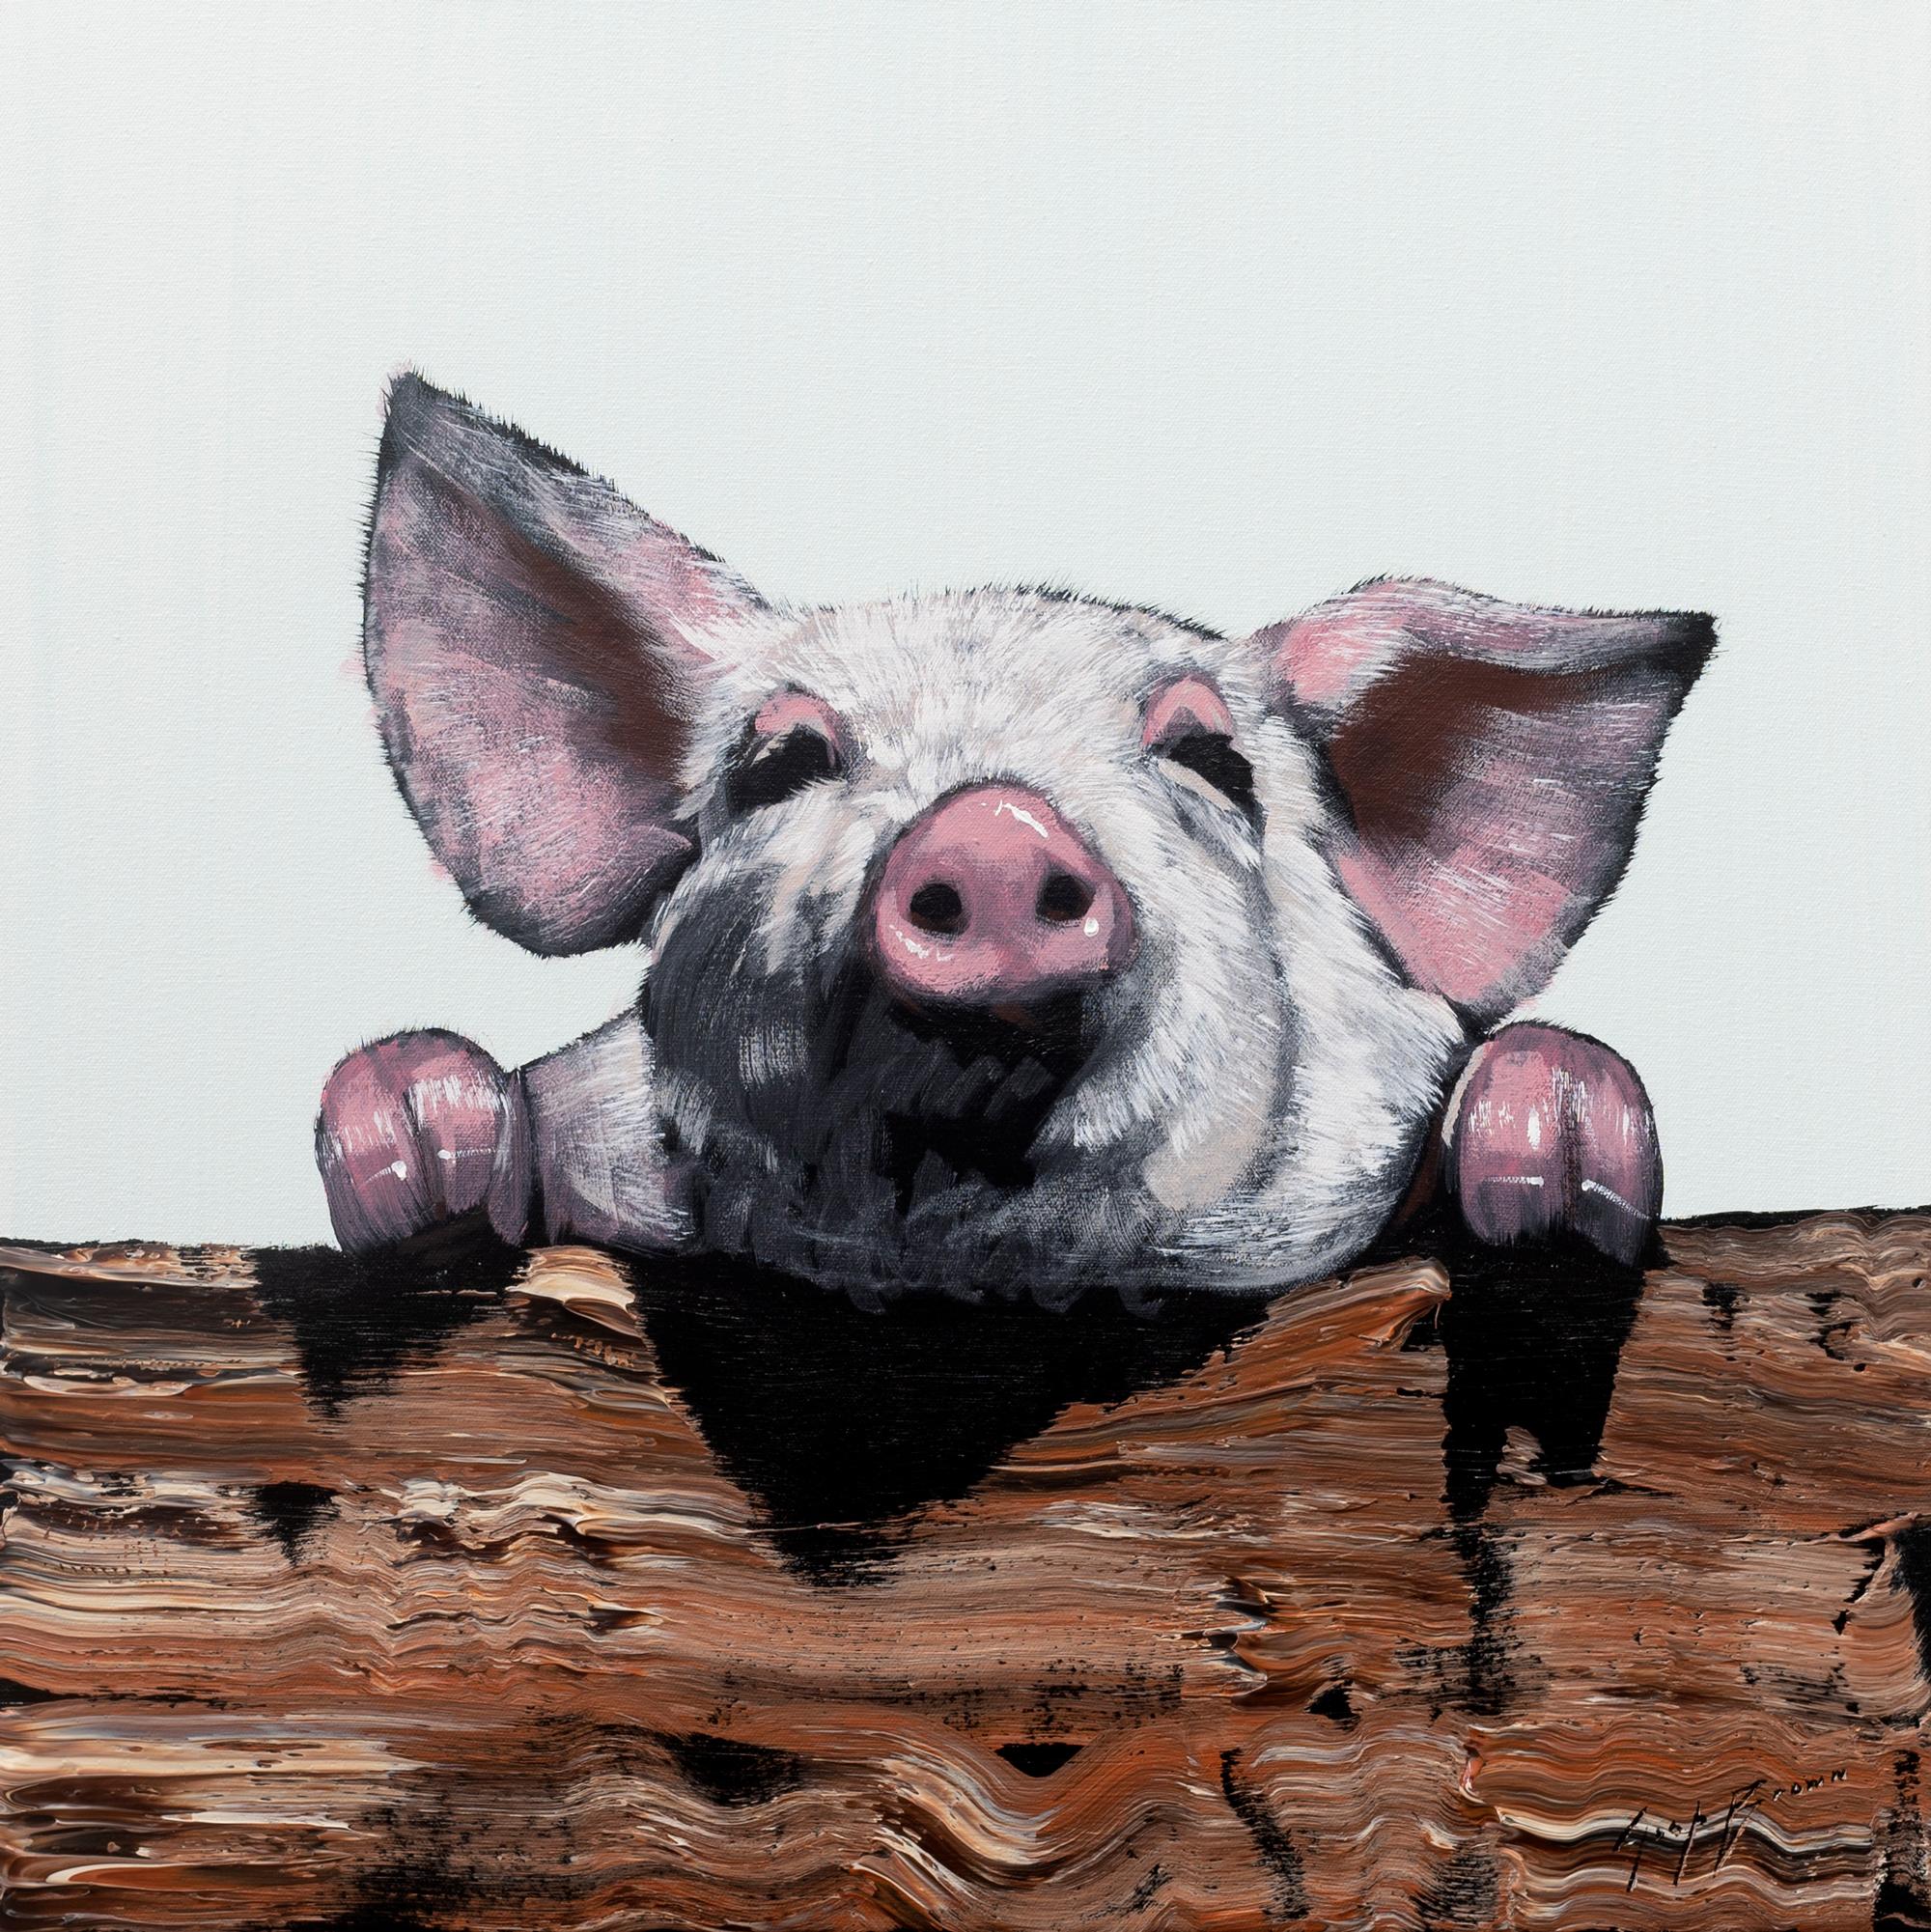 Pig on Fence 2 - Painting by Josh Brown